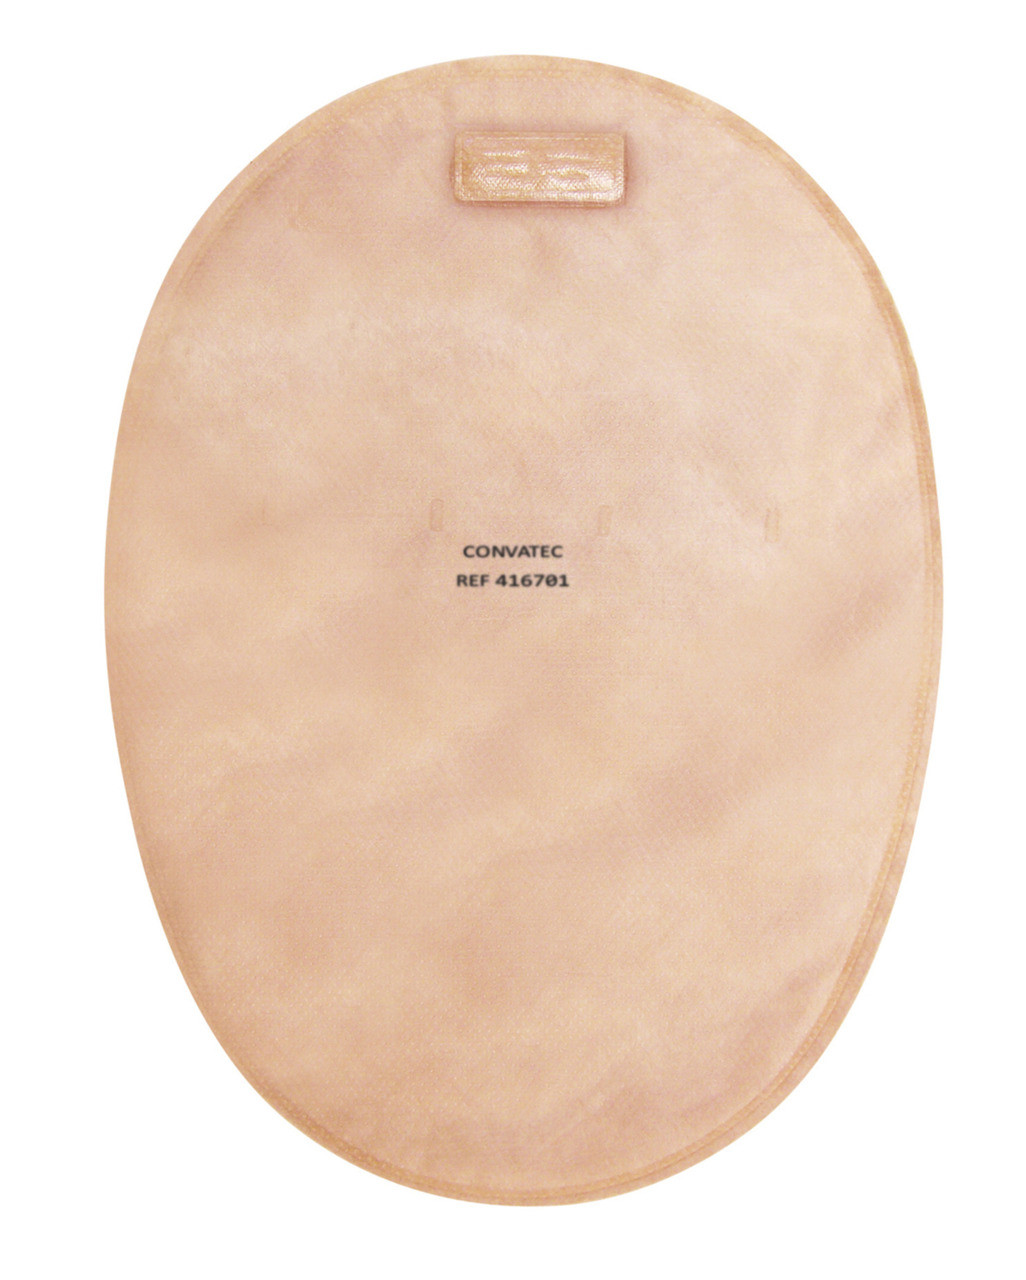 CONVATEC 416711 ESTEEM STOMAHESIVE CLOSED Pouch W/FILTER, PRE-CUT 35mm (1 3/8"), SMALL, OPAQUE BX/30